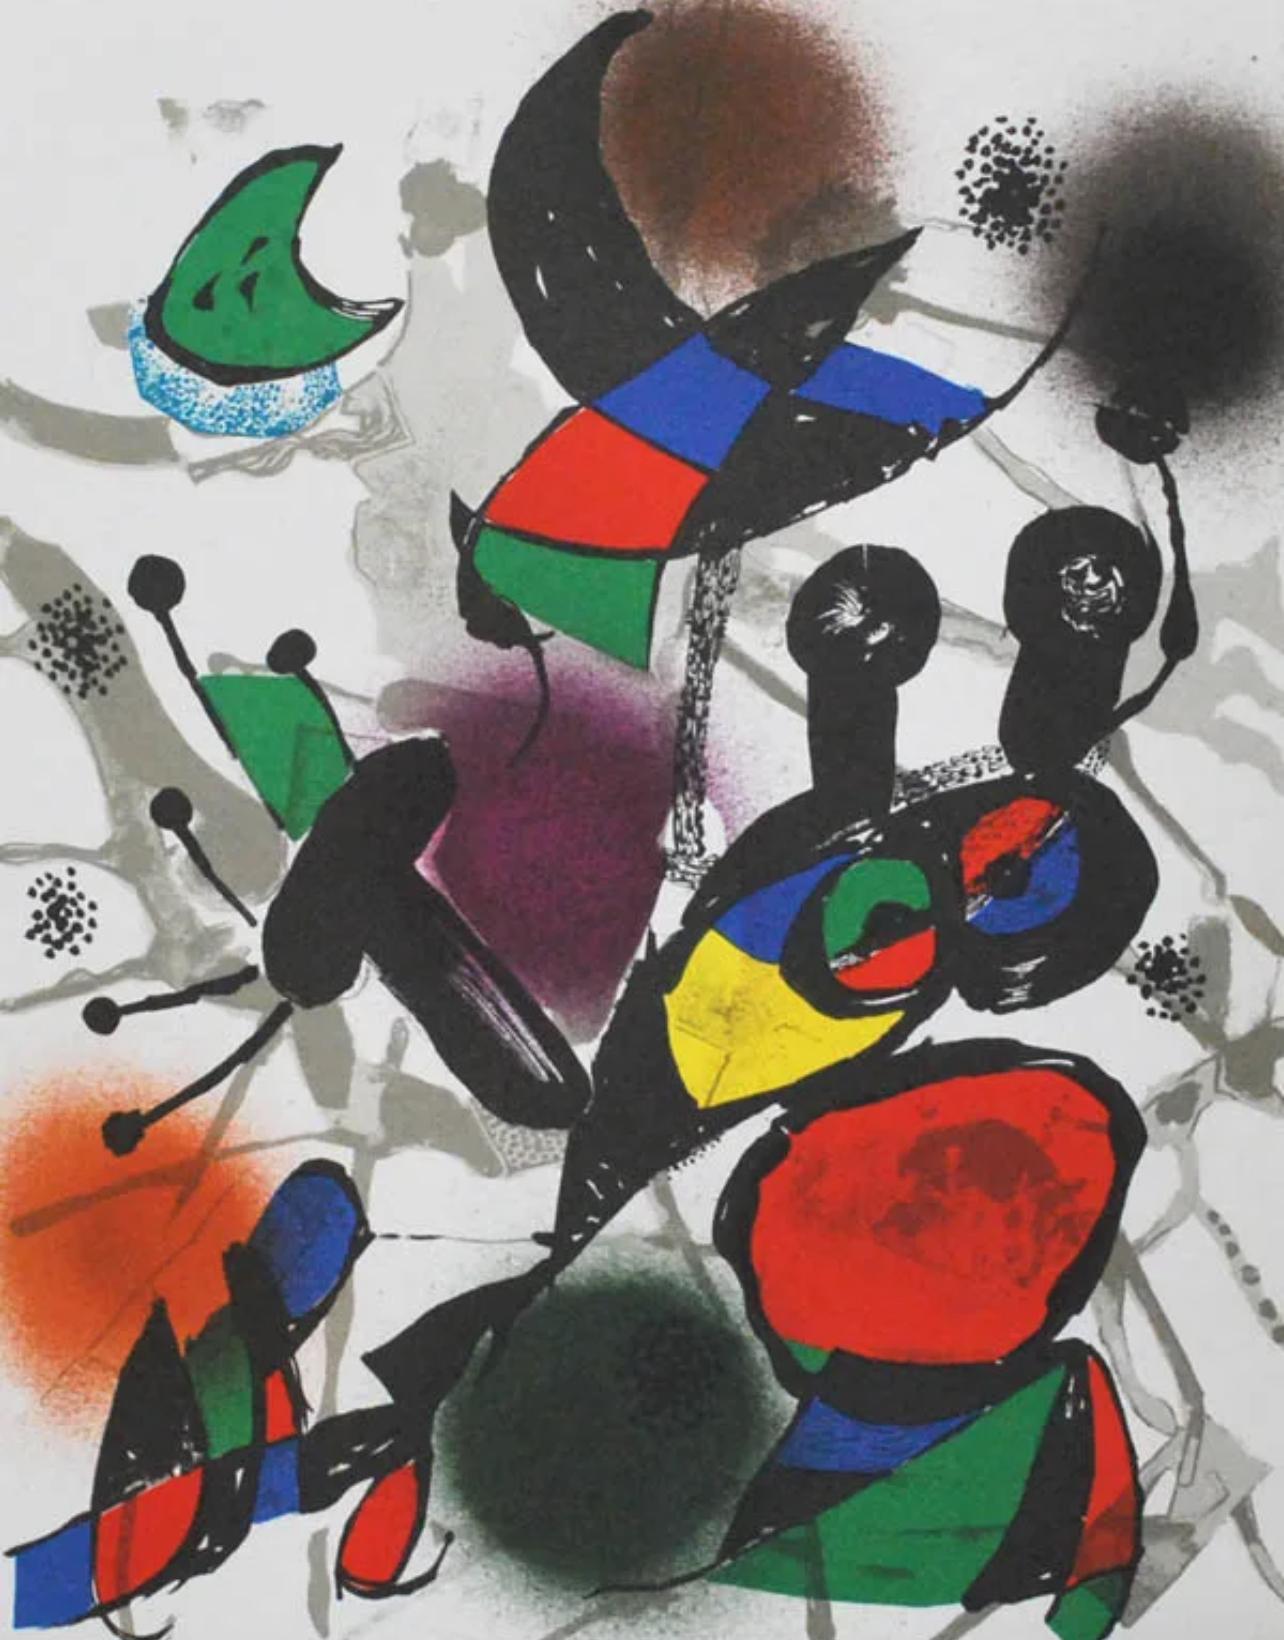 Joan Miró Abstract Print - Miro, Composition (Mourlot 1114), 1977 (after)